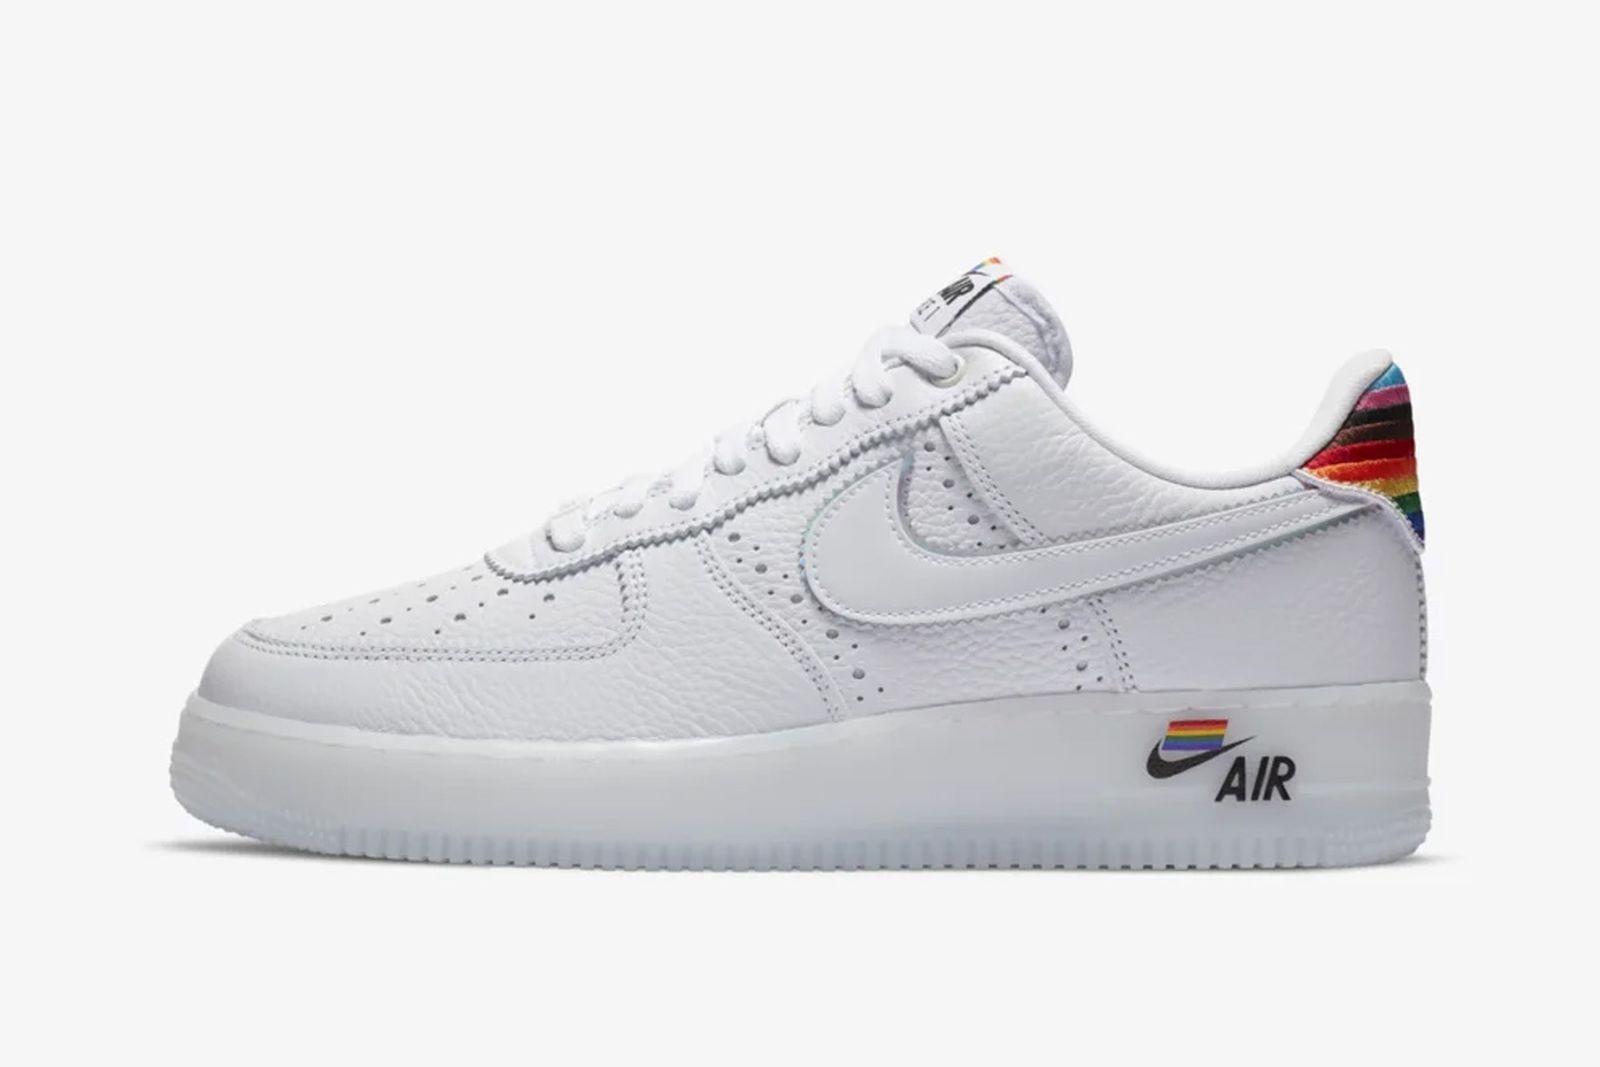 White and rainbow Pride Nike Air Force 1 side view